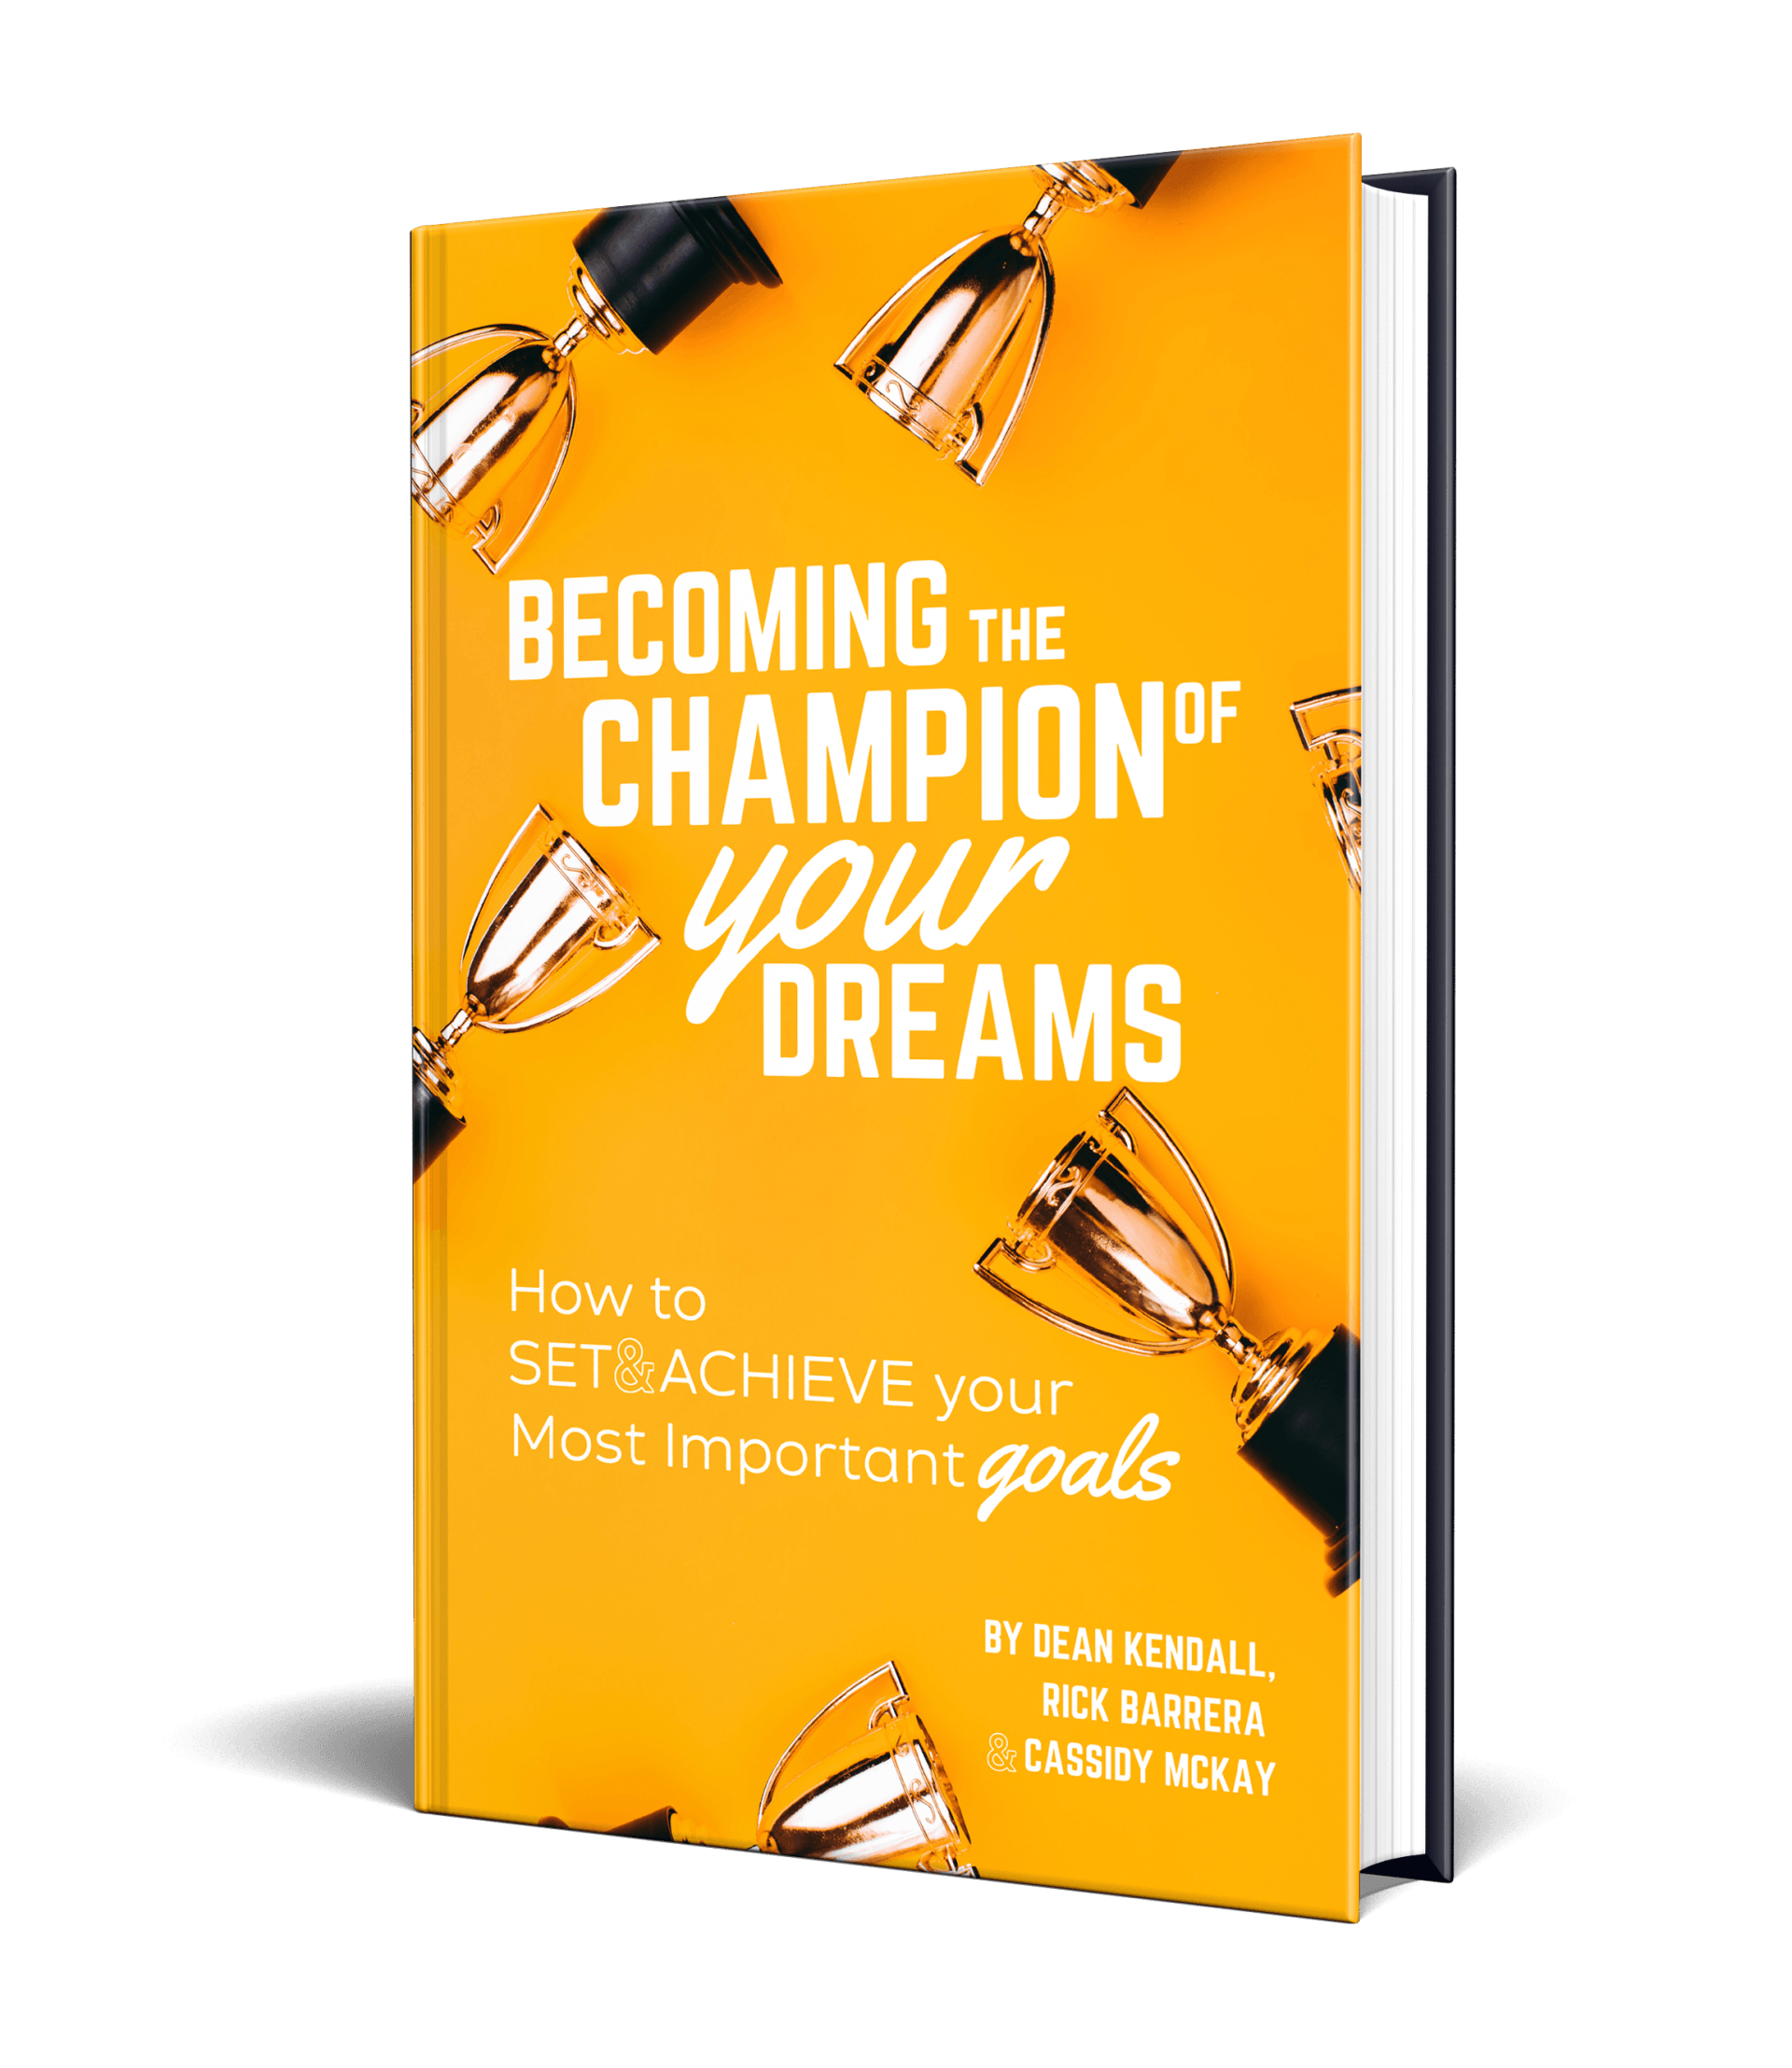 Becoming the Champion of your Dreams book cover